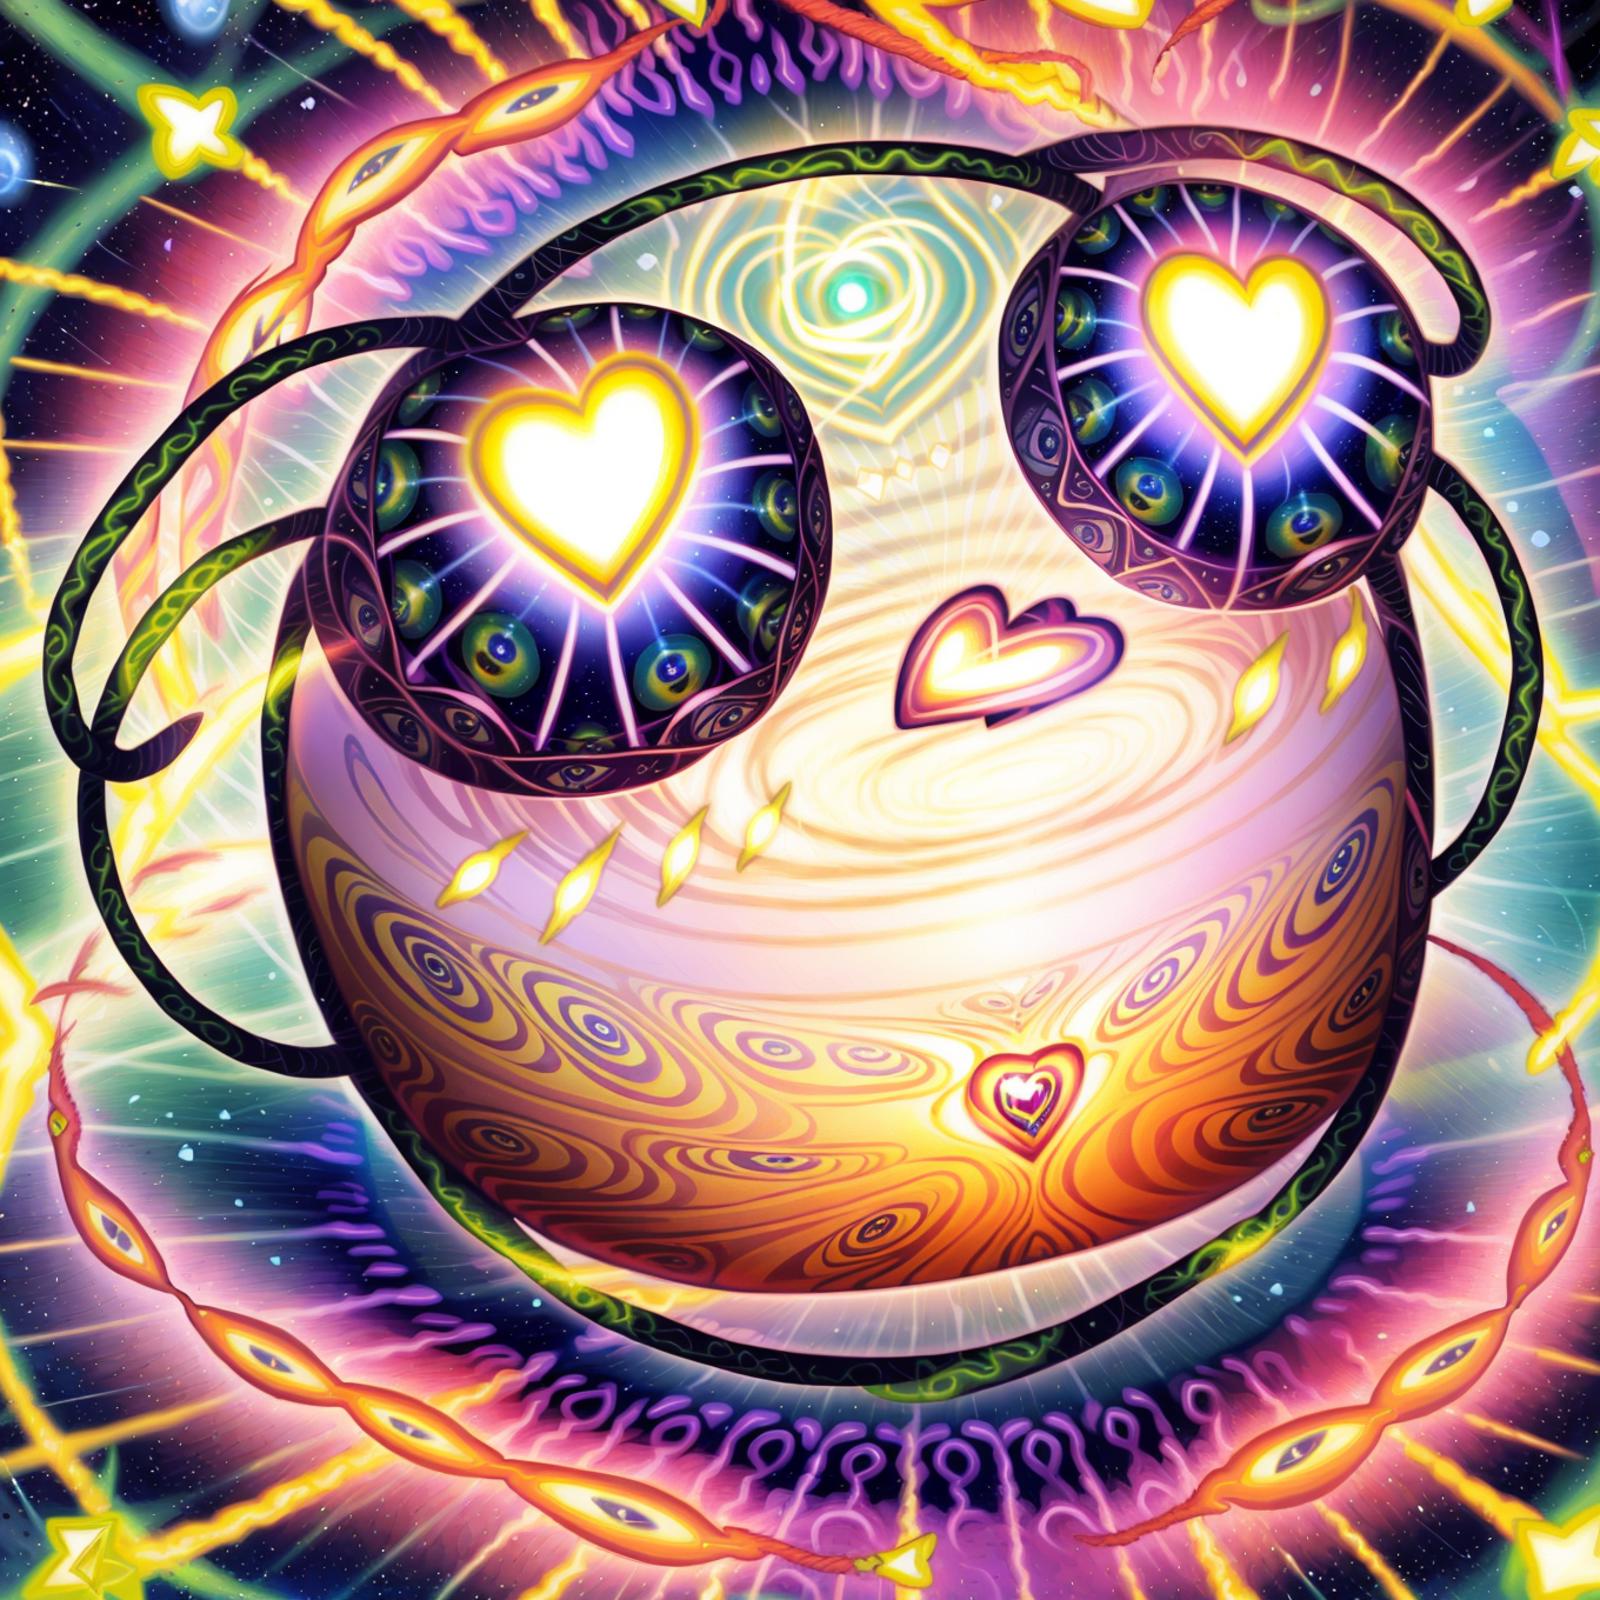 Alex Grey style art (SD 1.5) image by patchy319